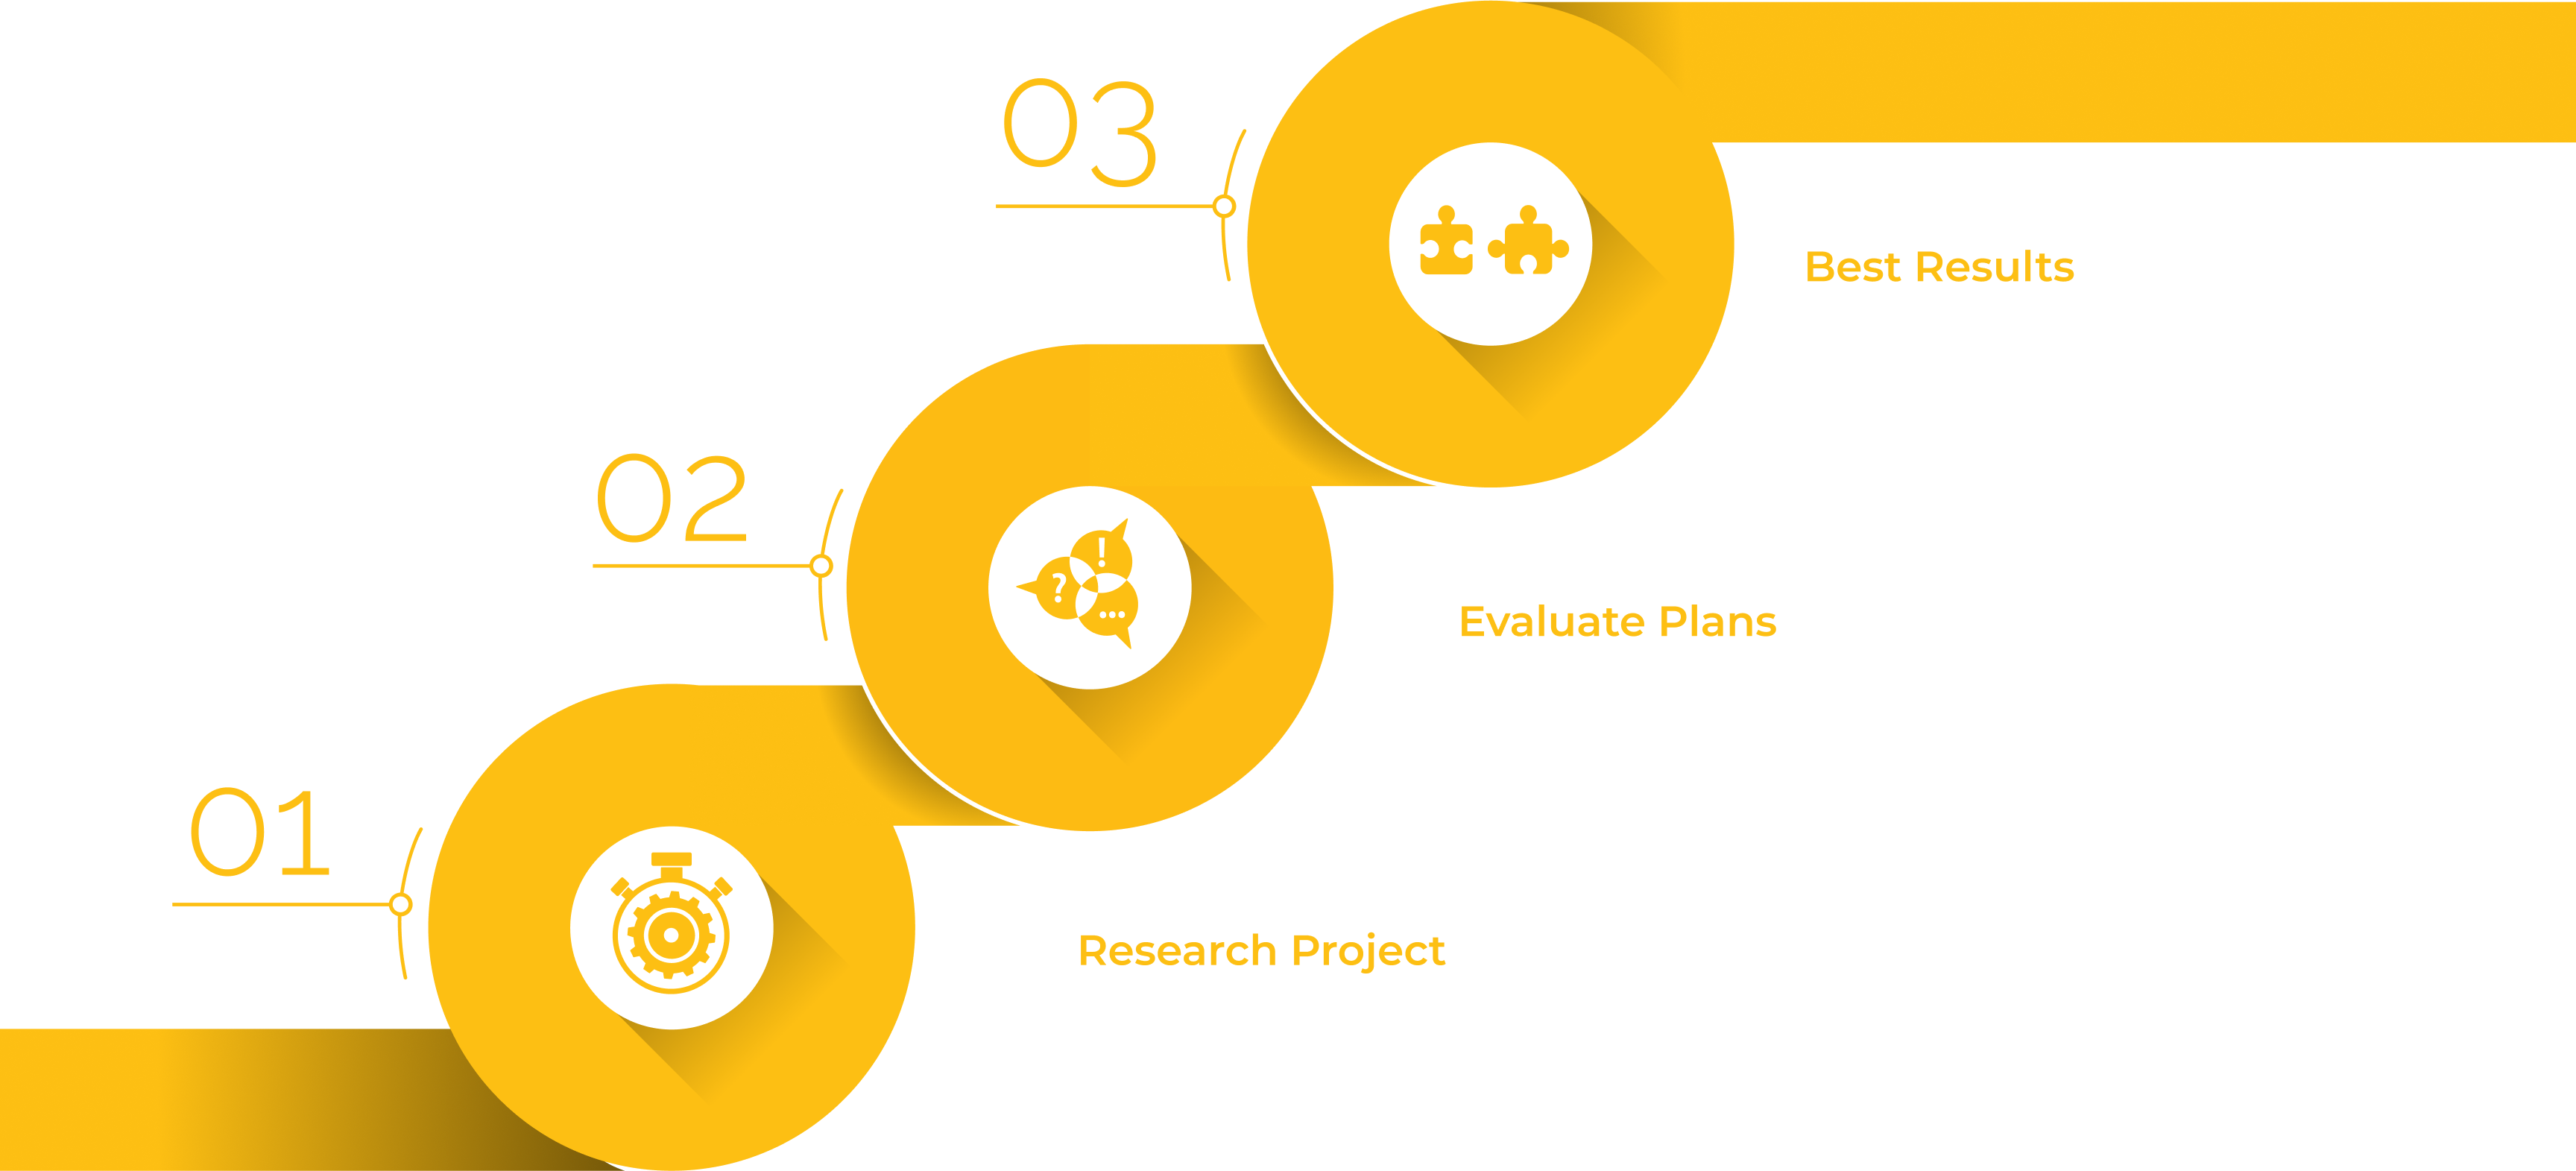 A yellow color image is designed specifically to show some steps steps about the company.